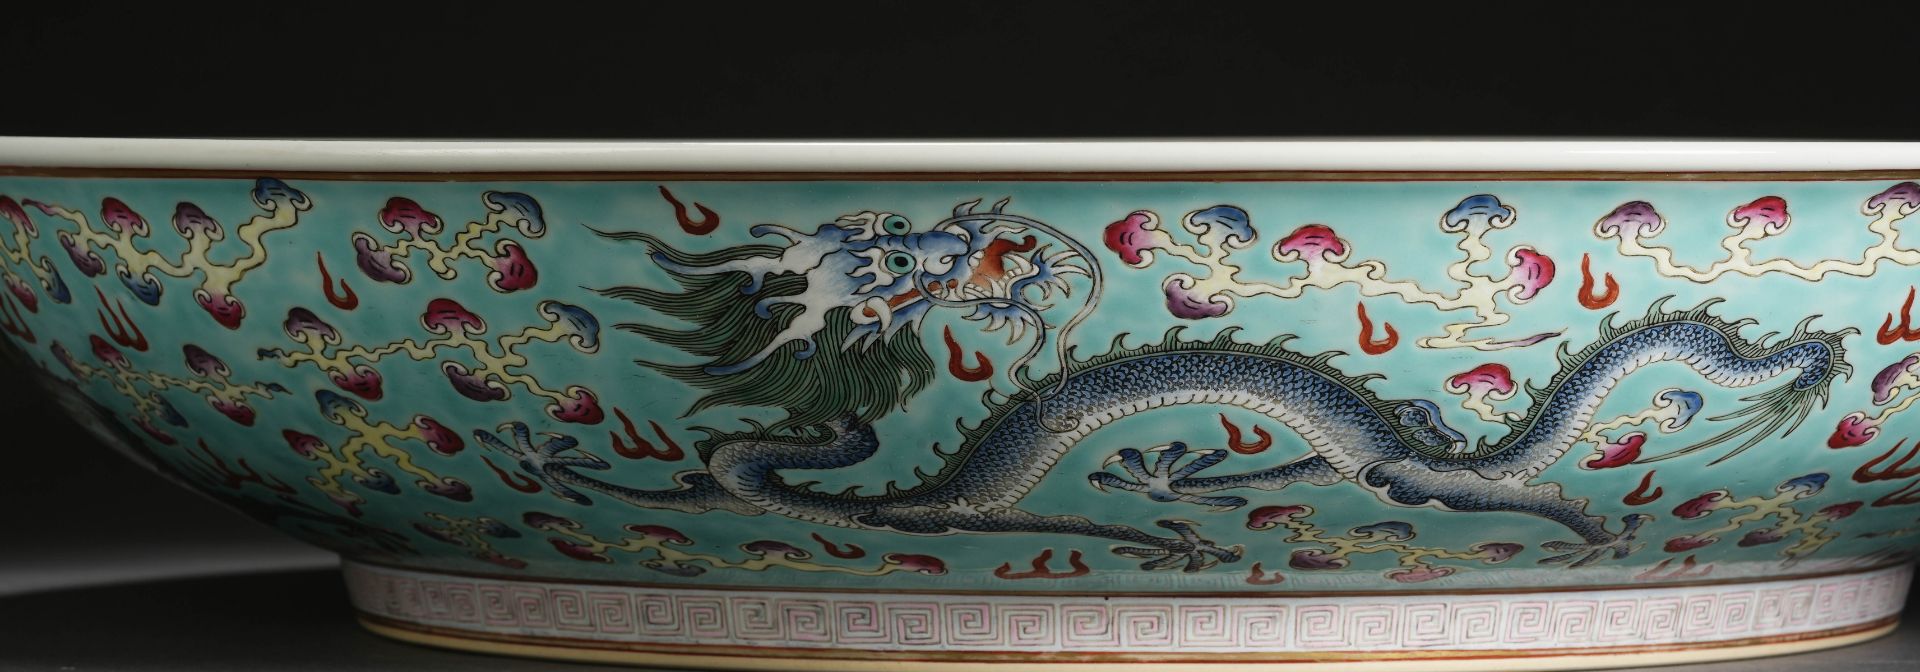 A Chinese Famille Rose Dragon Plate - Image 11 of 18